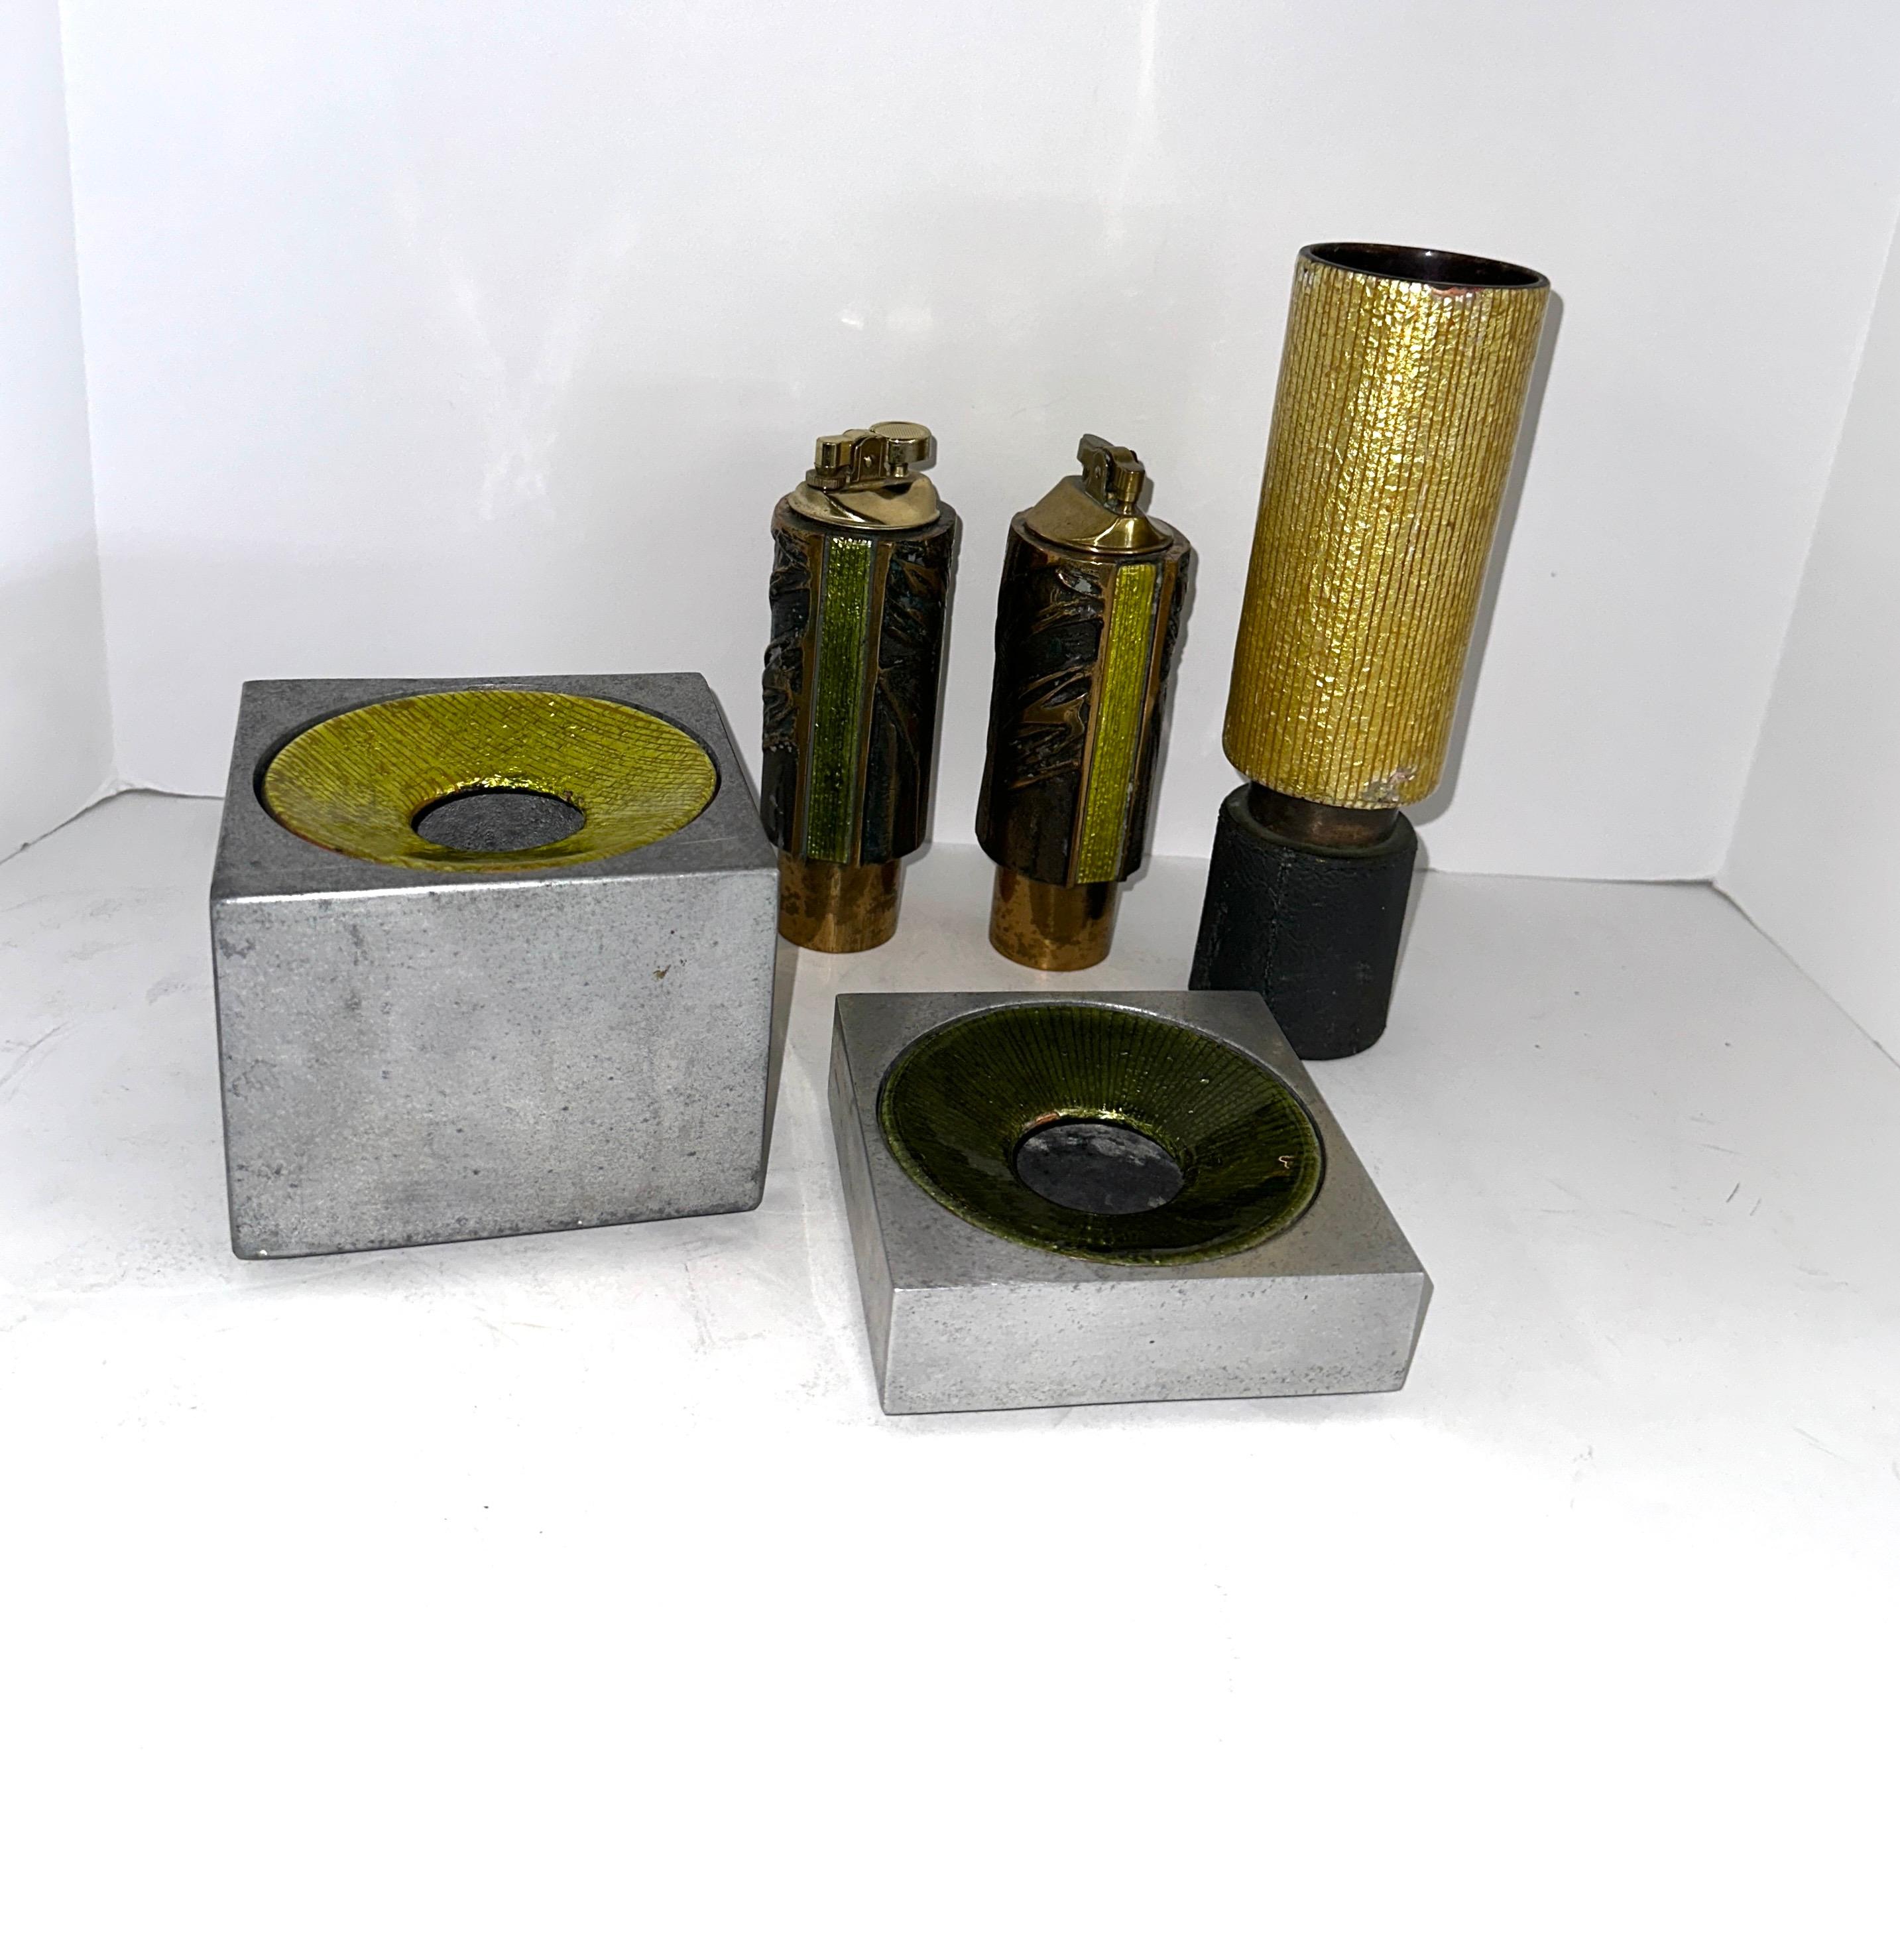 A lovely collection of 1960’s Studio Del Campo enameled pieces. There are 5 pieces, 2 lighters, 2 ashtrays and a bud vase. The vase and lighters are likely bronze or brass based, the ashtrays are some sort of white metal. 
The enamel on the two